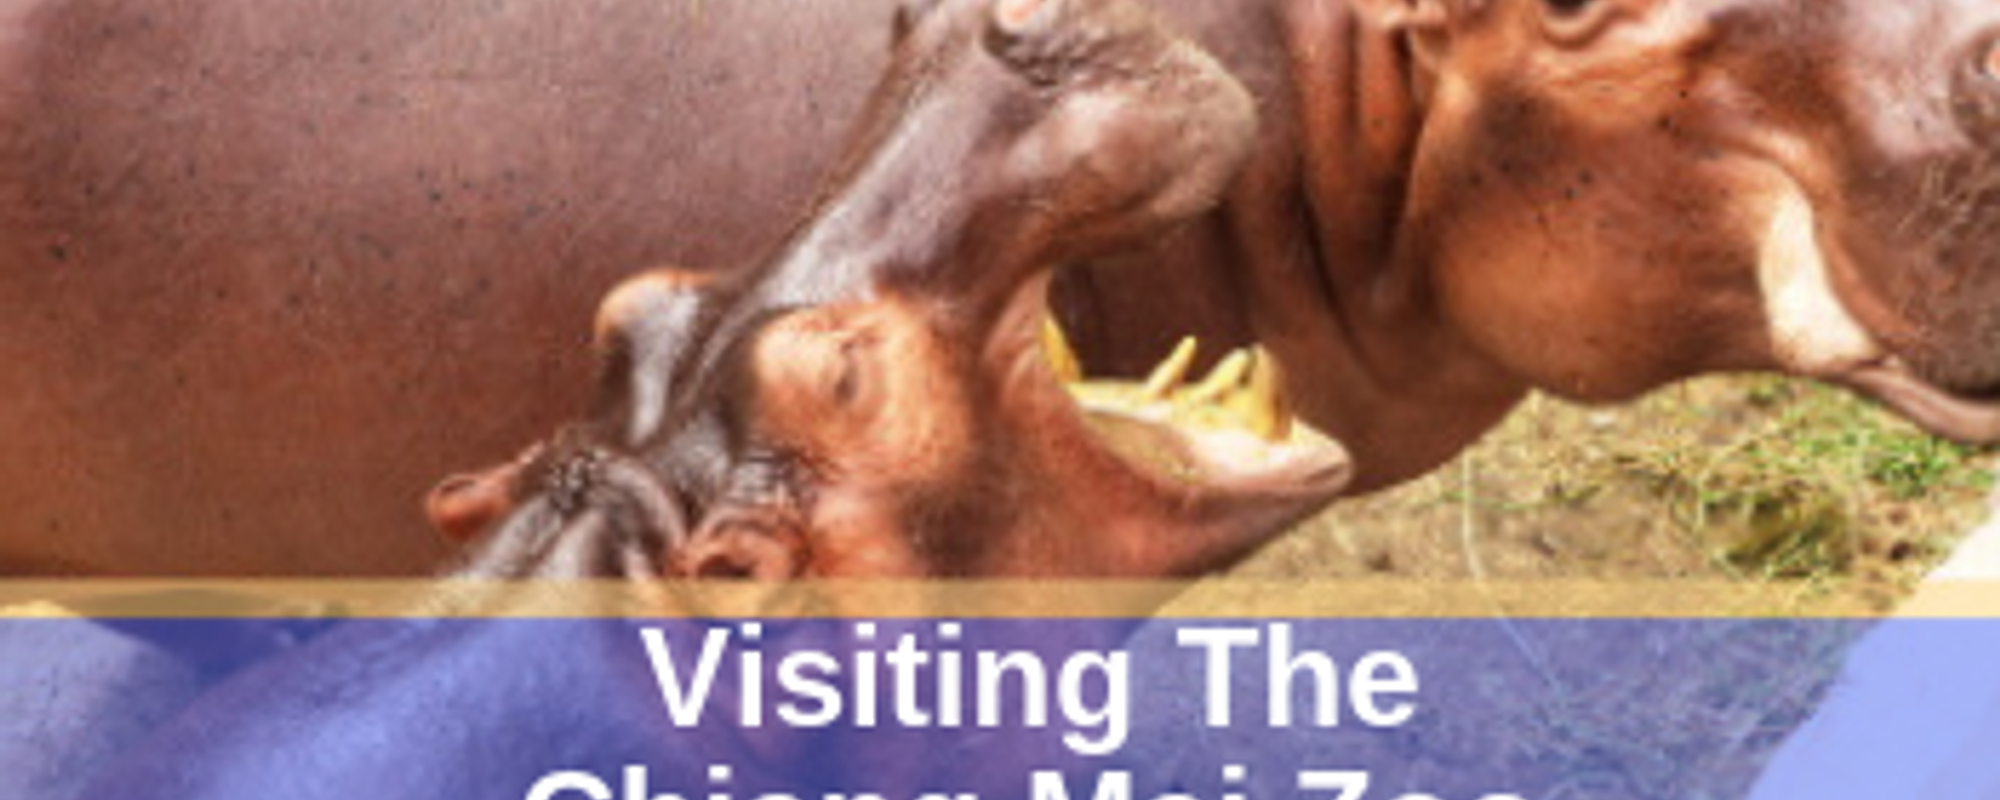 Visiting The Chaing Mai Zoo In Thailand